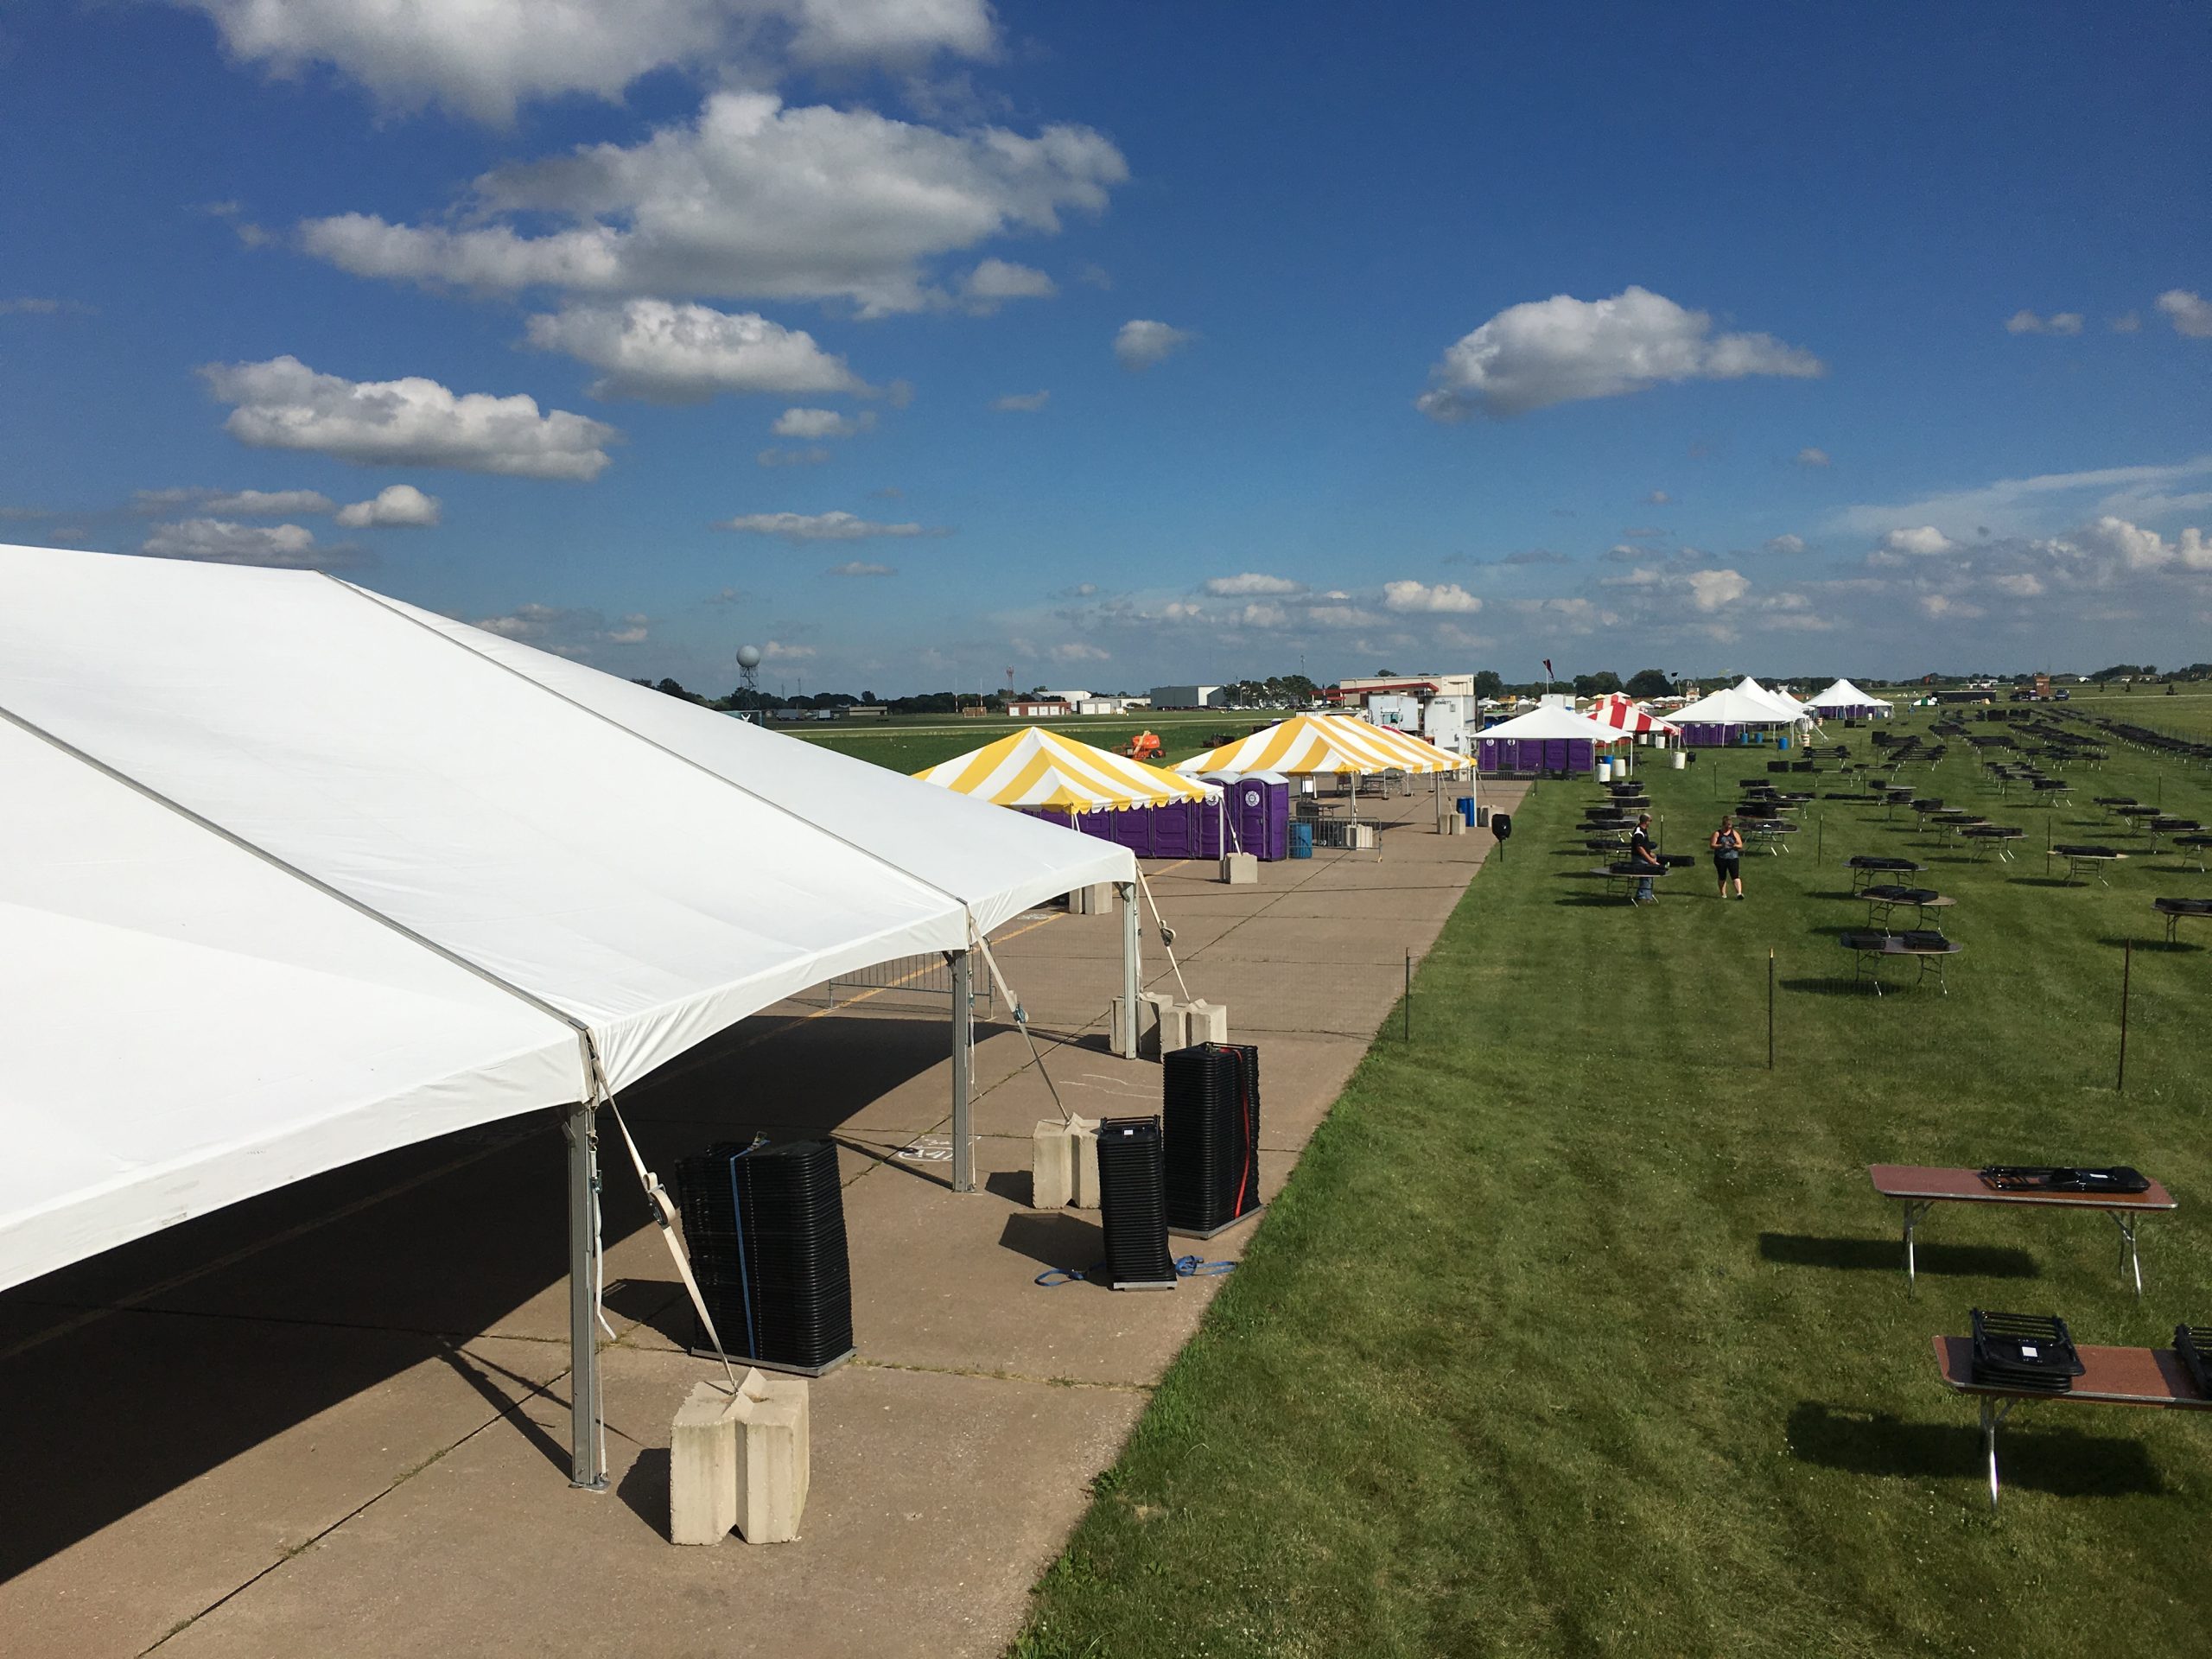 40' x 60' Hybrid tent, 20'x20' Frame tents and rope and pole tents in the distance for the 2016 Quad Cities Air Show